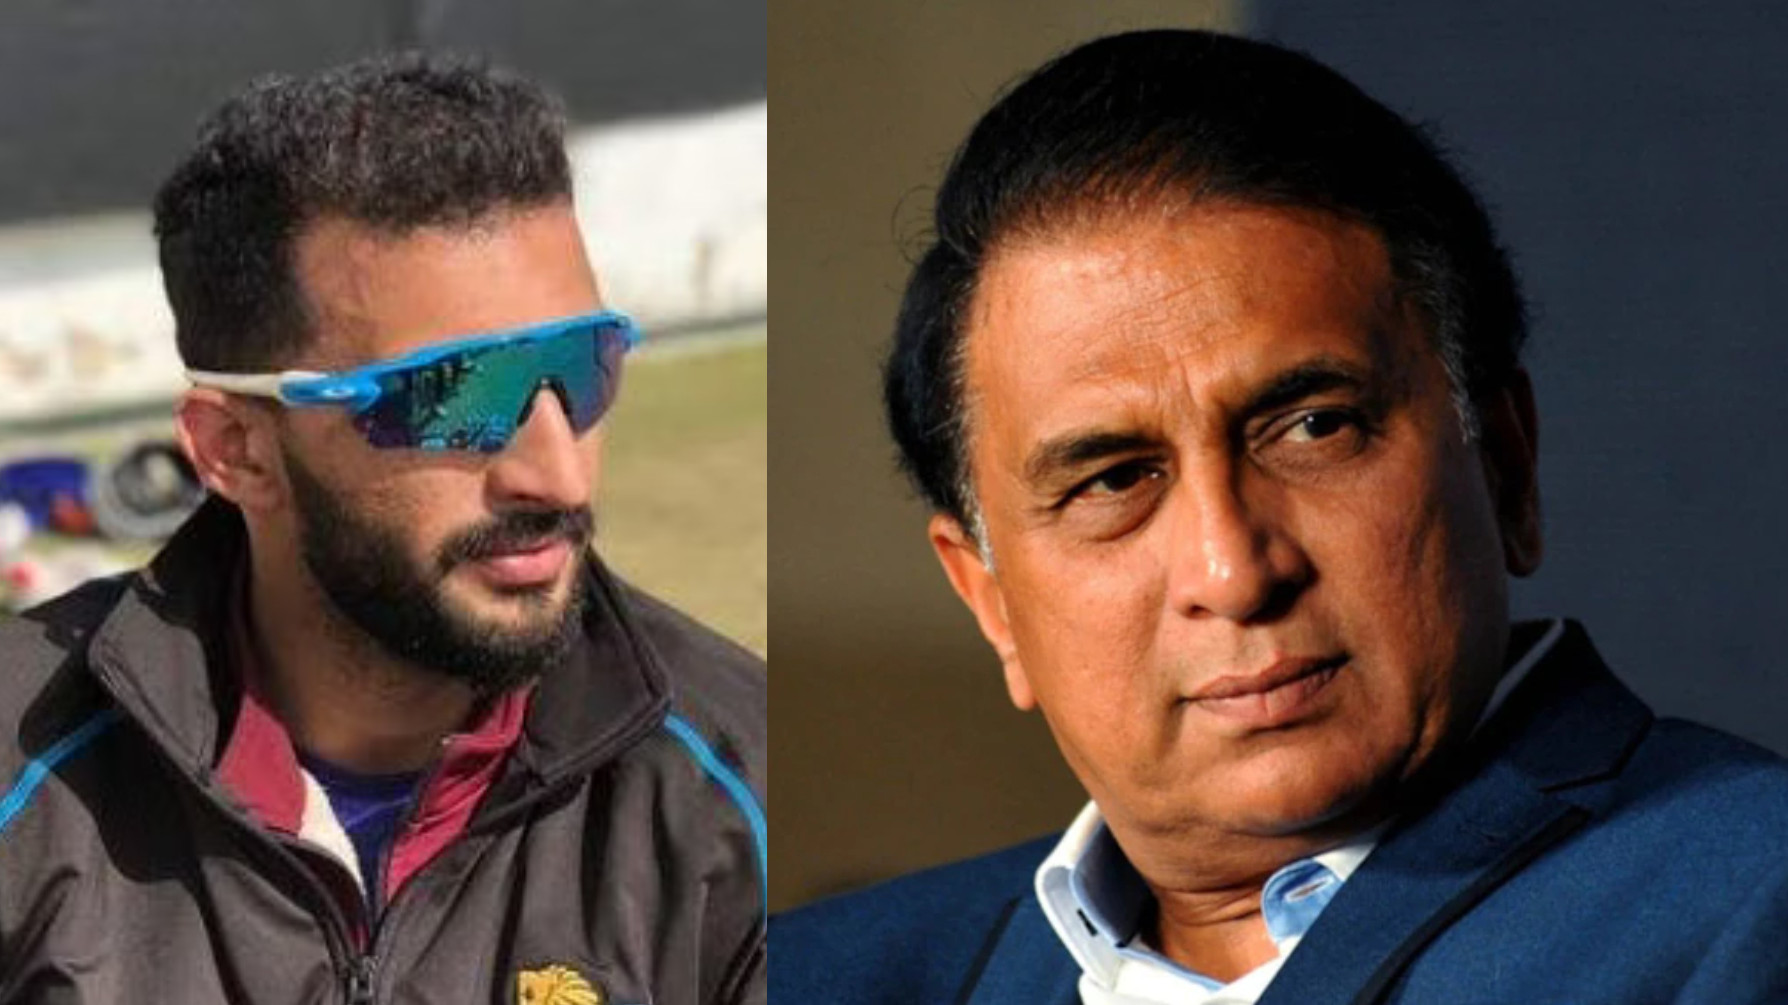 Sunil Gavaskar backs in-form Rishi Dhawan to do the fast bowling all-rounder job for India if given an opportunity